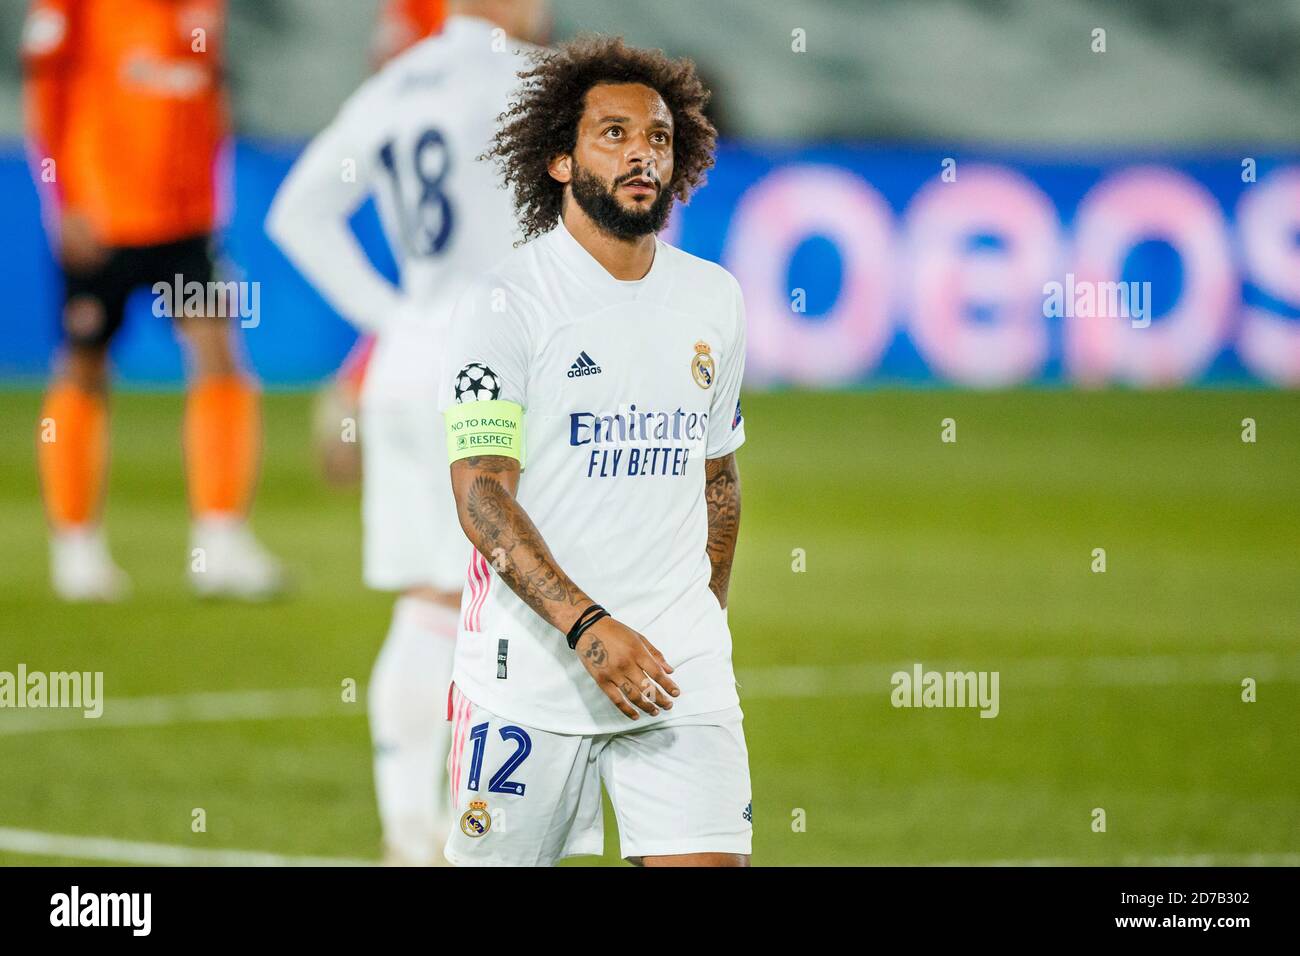 Madrid, Spain. 21st Oct, 2020. Marcelo of Real Madrid during the UEFA Champions League match between Real Madrid and FC Shakhtar Donetsk at at Estadio Alfredo Di Stefano on October 21, 2020 in Madrid, Spain. Credit: Dax Images/Alamy Live News Stock Photo